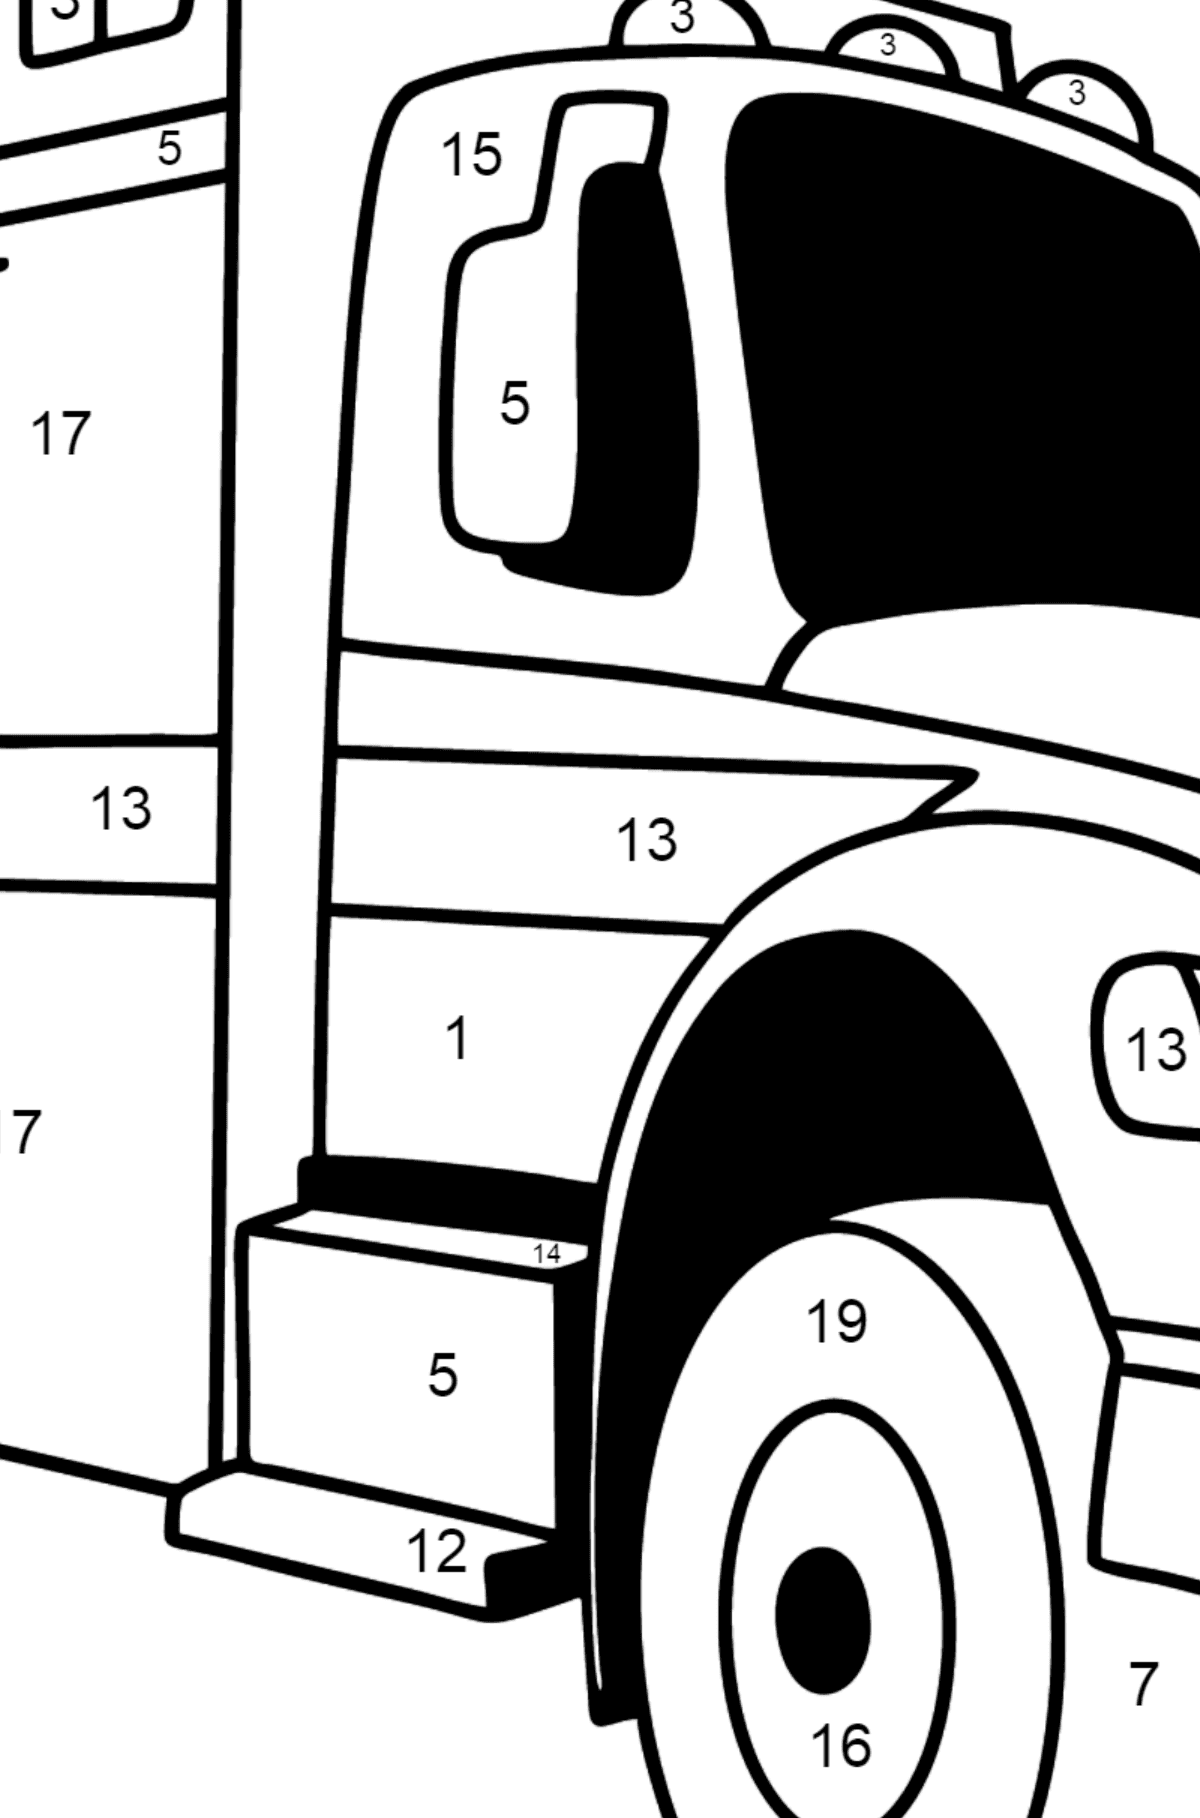 Fire Truck in Argentina coloring page - Coloring by Numbers for Kids